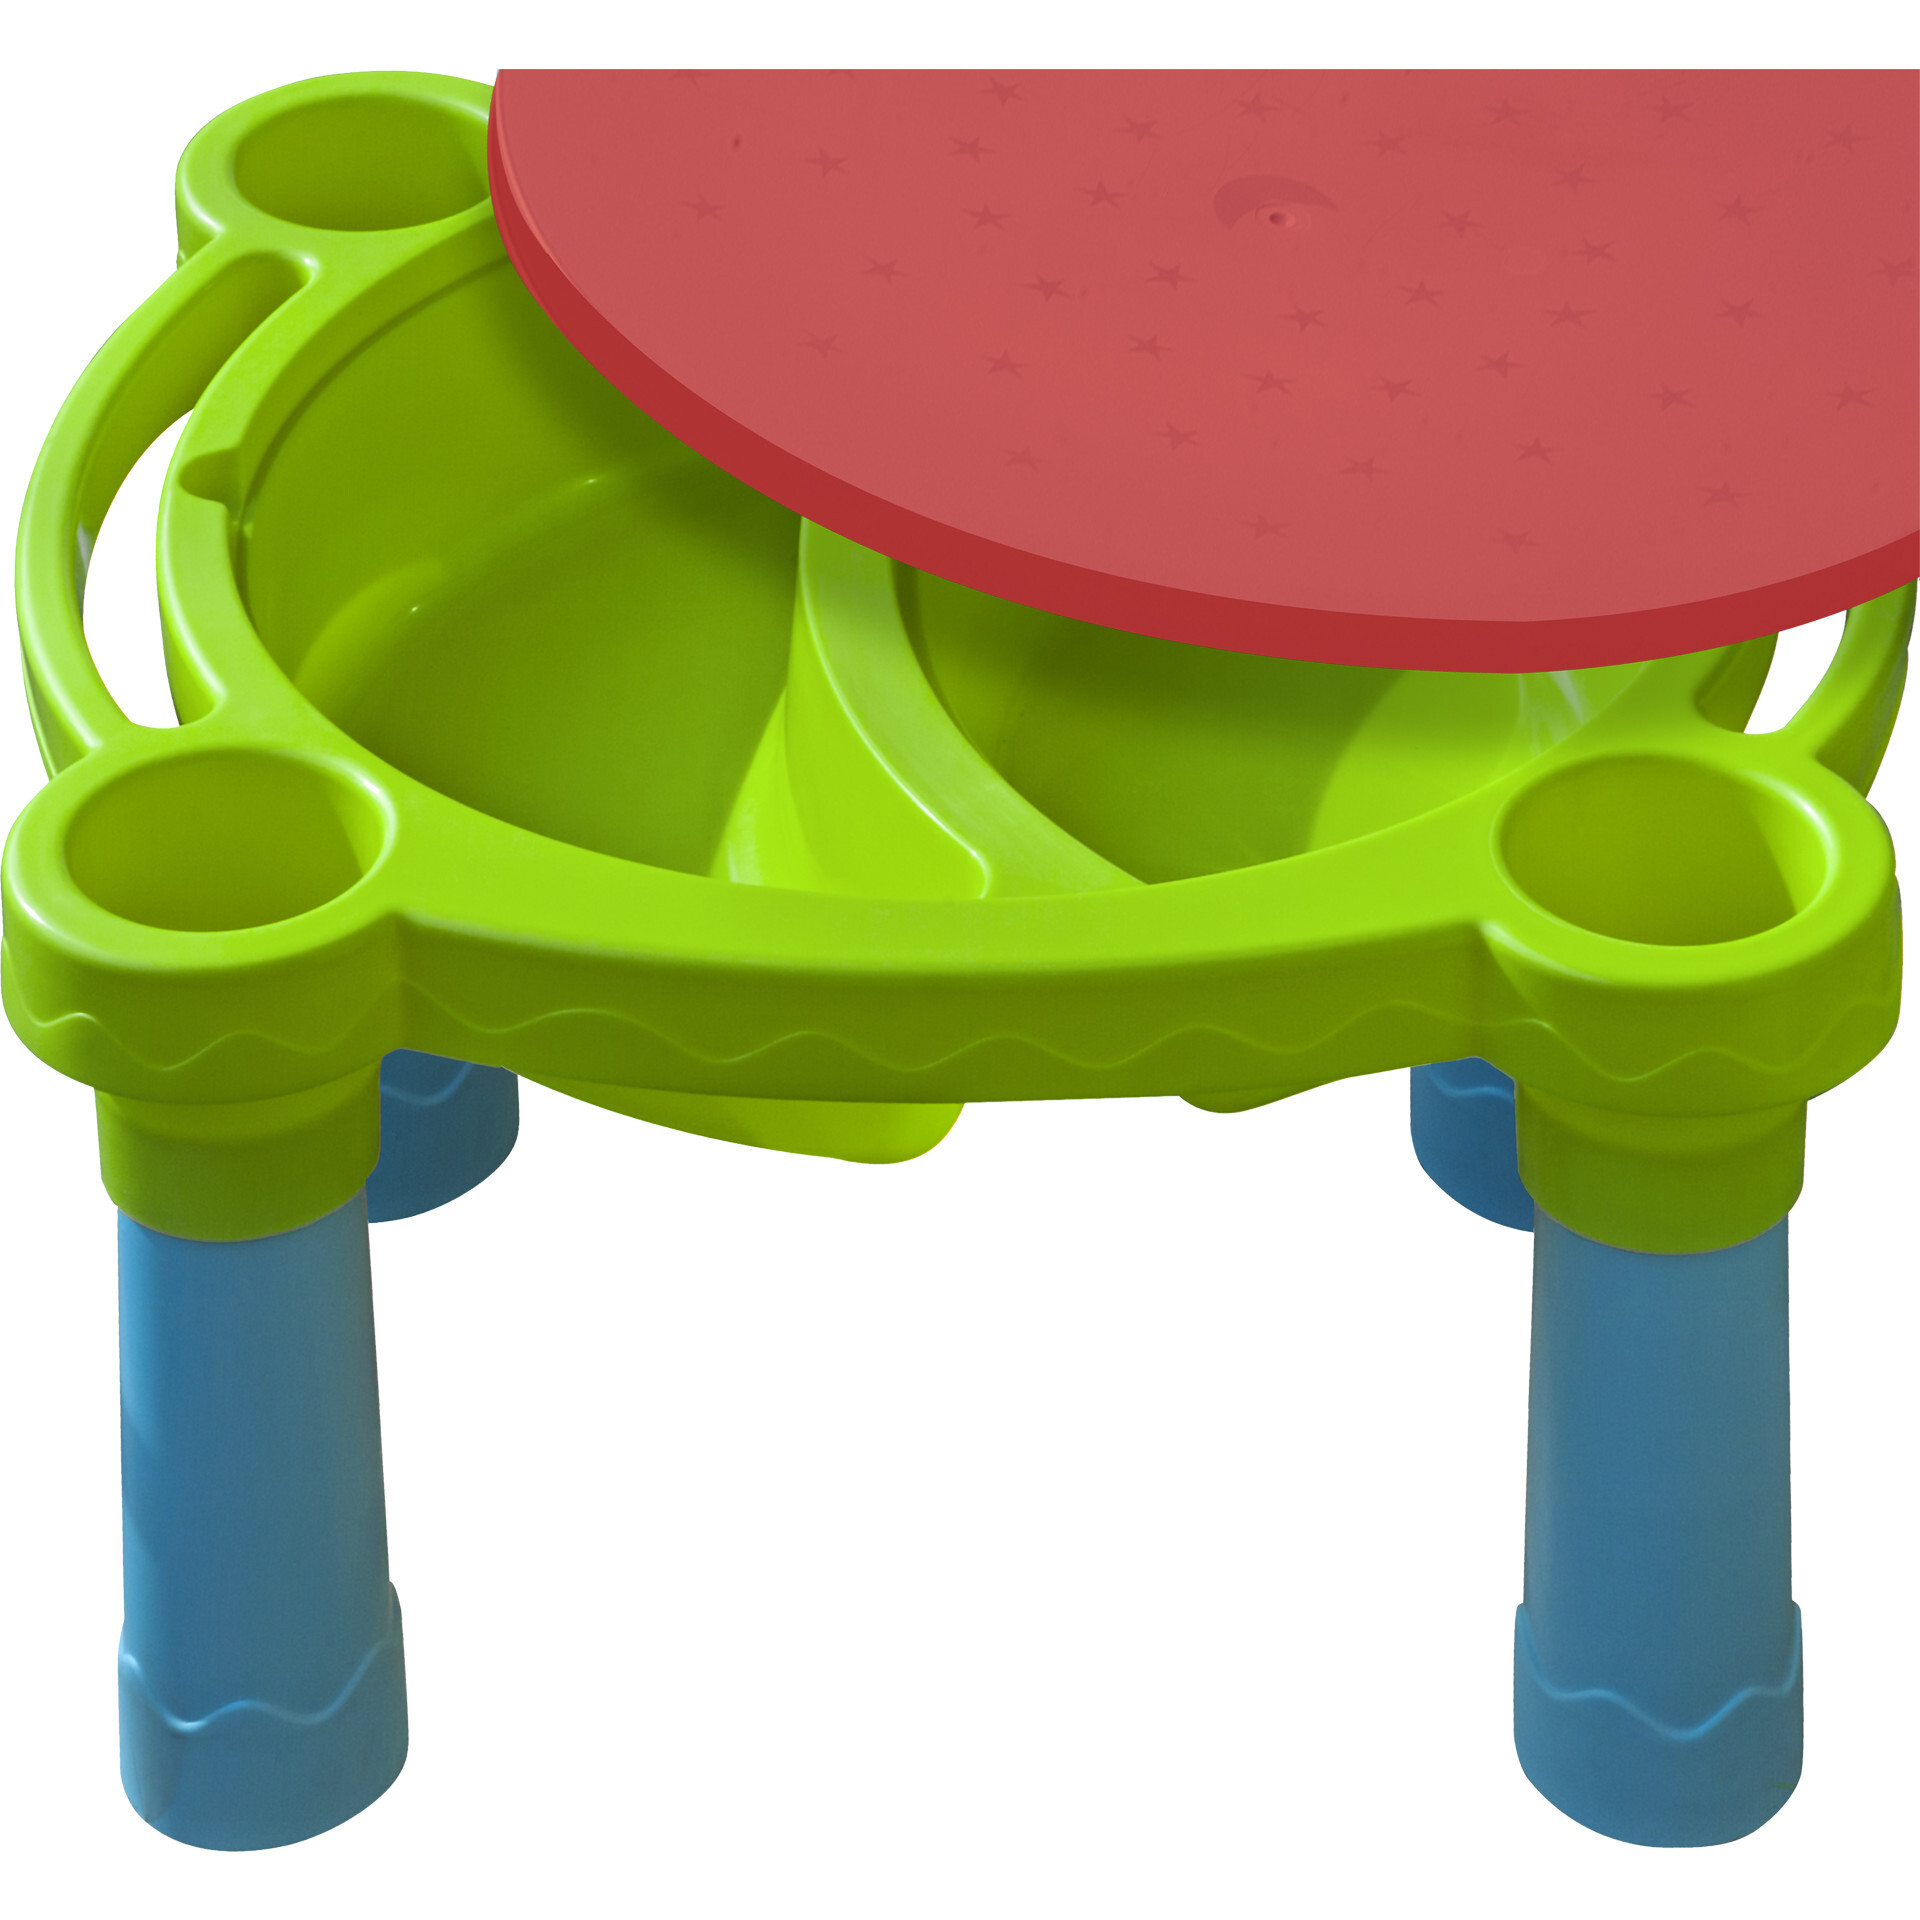 water table clip art